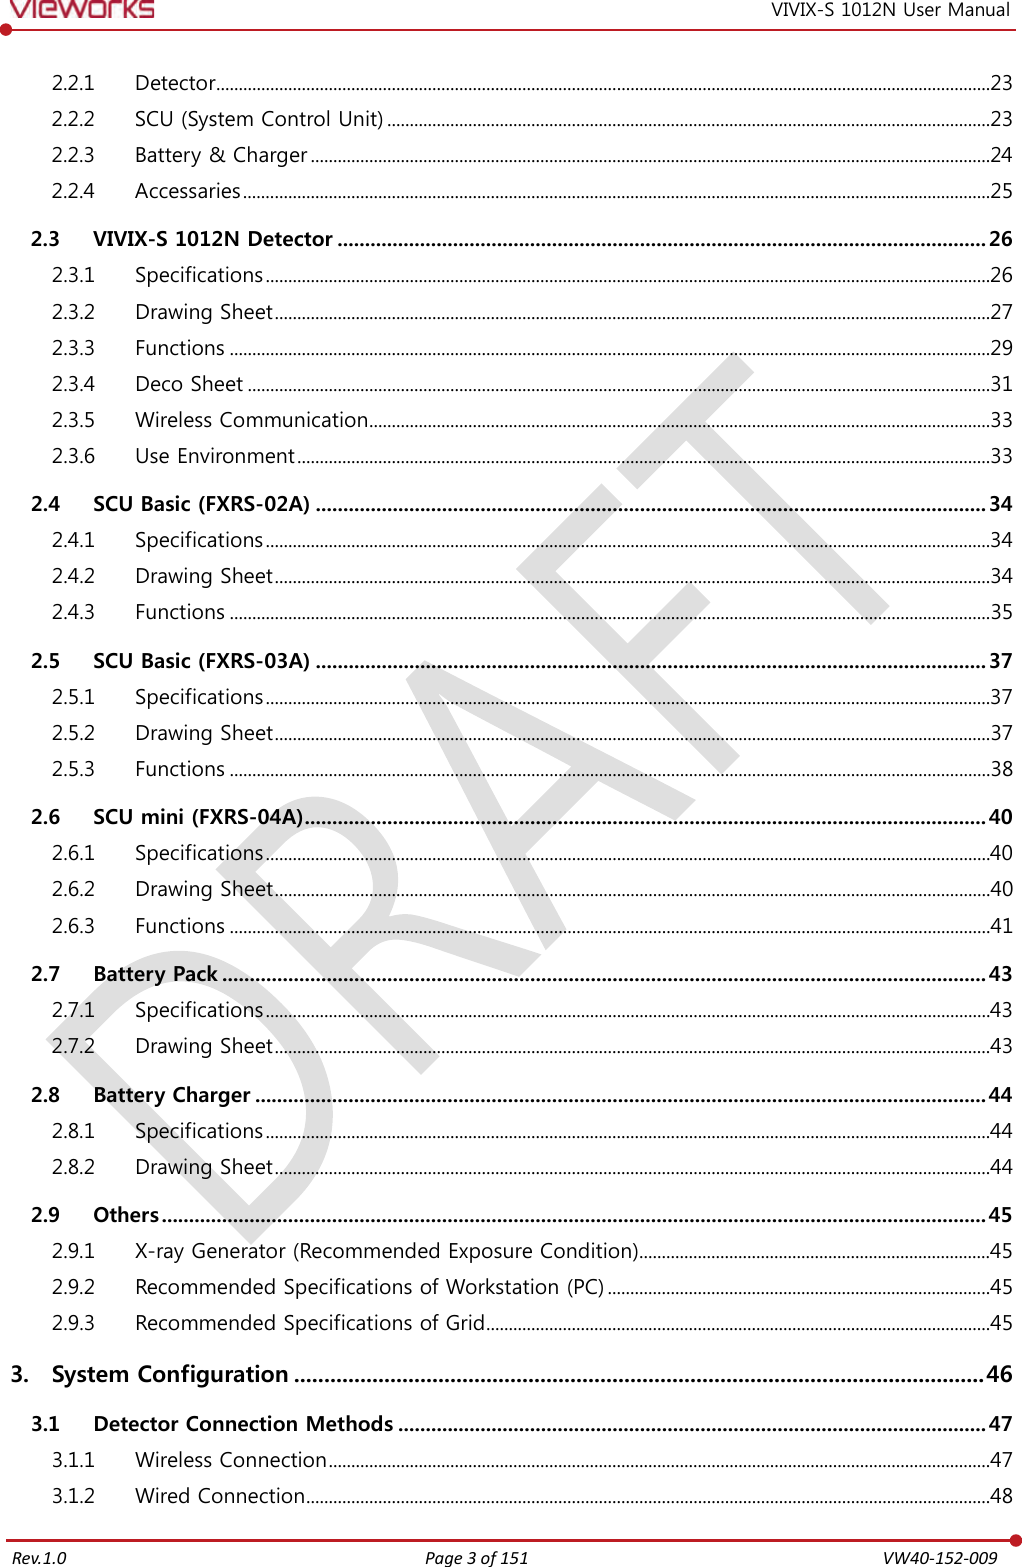   Rev.1.0 Page 3 of 151  VW40-152-009 VIVIX-S 1012N User Manual 2.2.1 Detector............................................................................................................................................................................23 2.2.2 SCU (System Control Unit) ......................................................................................................................................23 2.2.3 Battery &amp; Charger .......................................................................................................................................................24 2.2.4 Accessaries ......................................................................................................................................................................25 2.3 VIVIX-S 1012N Detector ...................................................................................................................... 26 2.3.1 Specifications .................................................................................................................................................................26 2.3.2 Drawing Sheet ...............................................................................................................................................................27 2.3.3  Functions .........................................................................................................................................................................29 2.3.4 Deco Sheet .....................................................................................................................................................................31 2.3.5 Wireless Communication..........................................................................................................................................33 2.3.6 Use Environment ..........................................................................................................................................................33 2.4 SCU Basic (FXRS-02A) .......................................................................................................................... 34 2.4.1 Specifications .................................................................................................................................................................34 2.4.2 Drawing Sheet ...............................................................................................................................................................34 2.4.3  Functions .........................................................................................................................................................................35 2.5 SCU Basic (FXRS-03A) .......................................................................................................................... 37 2.5.1 Specifications .................................................................................................................................................................37 2.5.2 Drawing Sheet ...............................................................................................................................................................37 2.5.3  Functions .........................................................................................................................................................................38 2.6 SCU mini (FXRS-04A) ............................................................................................................................ 40 2.6.1 Specifications .................................................................................................................................................................40 2.6.2 Drawing Sheet ...............................................................................................................................................................40 2.6.3  Functions .........................................................................................................................................................................41 2.7 Battery Pack ........................................................................................................................................... 43 2.7.1 Specifications .................................................................................................................................................................43 2.7.2 Drawing Sheet ...............................................................................................................................................................43 2.8 Battery Charger ..................................................................................................................................... 44 2.8.1 Specifications .................................................................................................................................................................44 2.8.2 Drawing Sheet ...............................................................................................................................................................44 2.9 Others ...................................................................................................................................................... 45 2.9.1  X-ray Generator (Recommended Exposure Condition)..............................................................................45 2.9.2 Recommended Specifications of Workstation (PC) .....................................................................................45 2.9.3 Recommended Specifications of Grid ................................................................................................................45 3. System Configuration ................................................................................................................... 46 3.1 Detector Connection Methods ........................................................................................................... 47 3.1.1 Wireless Connection ...................................................................................................................................................47 3.1.2 Wired Connection ........................................................................................................................................................48 